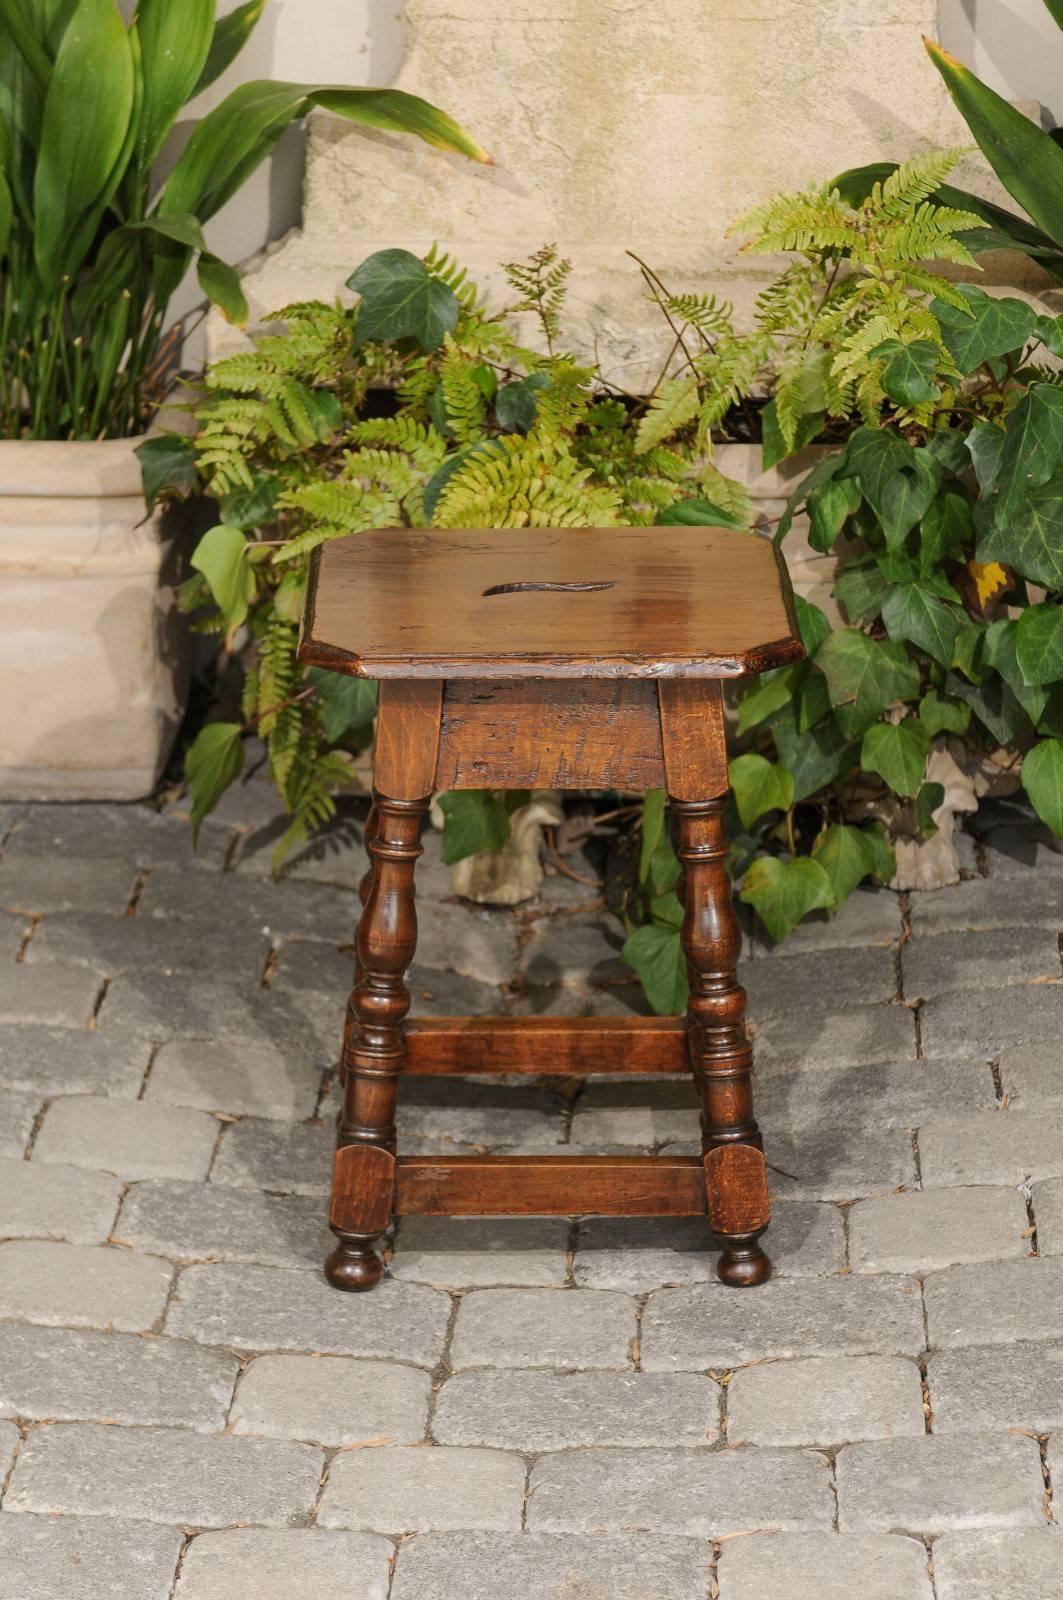 Wood Italian Walnut Stool with Splayed Legs and Pierced Handle from the 1820s